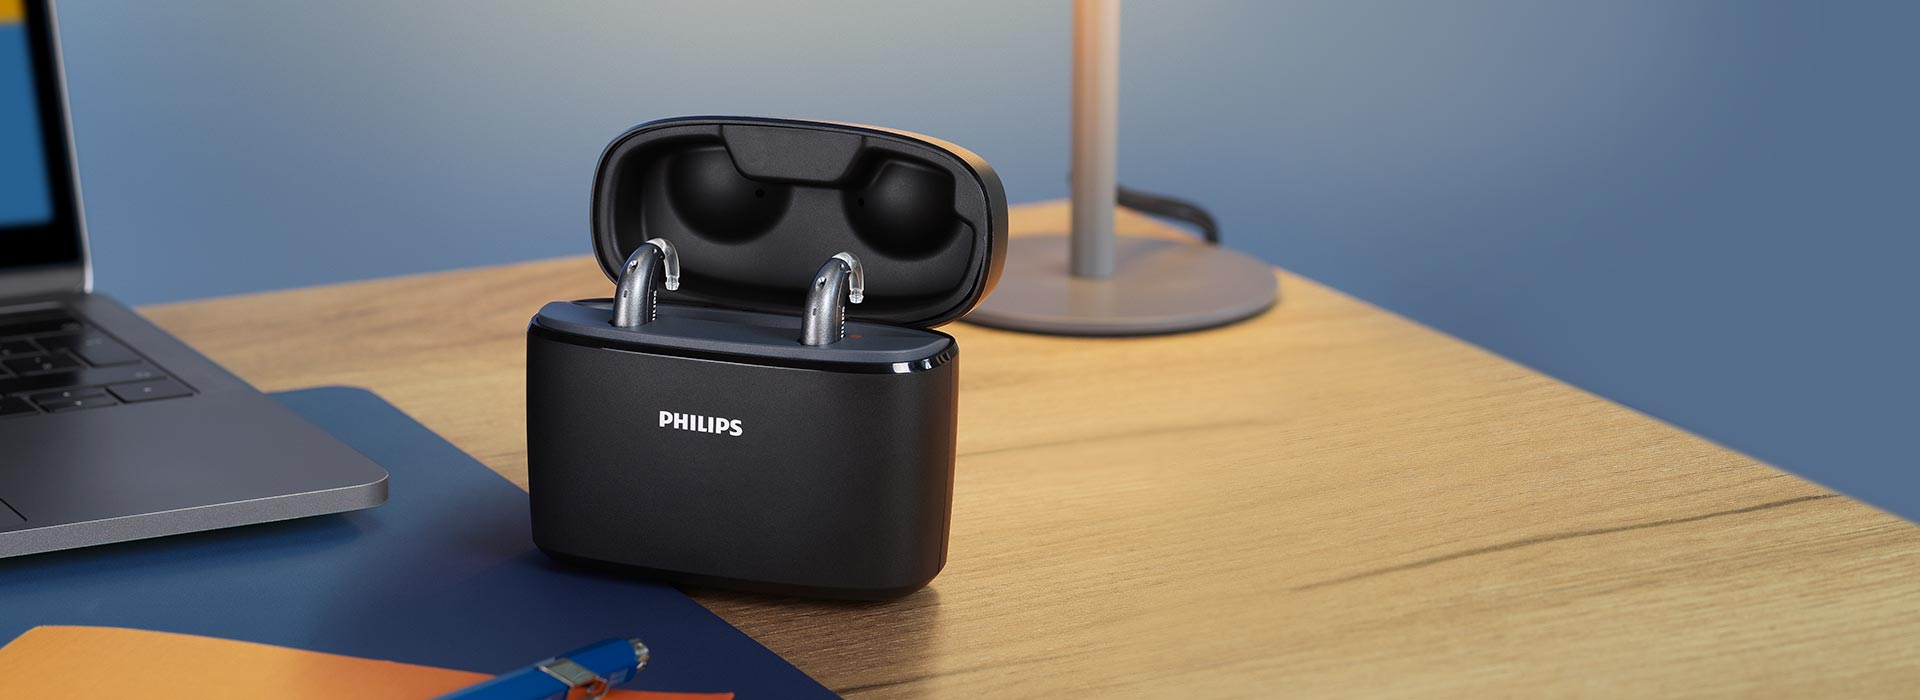 Philips HearLink rechargable hearing aids sit inside the portable Charger Plus, which lays on a home work desk next to a laptop, lamp, notebook and pen